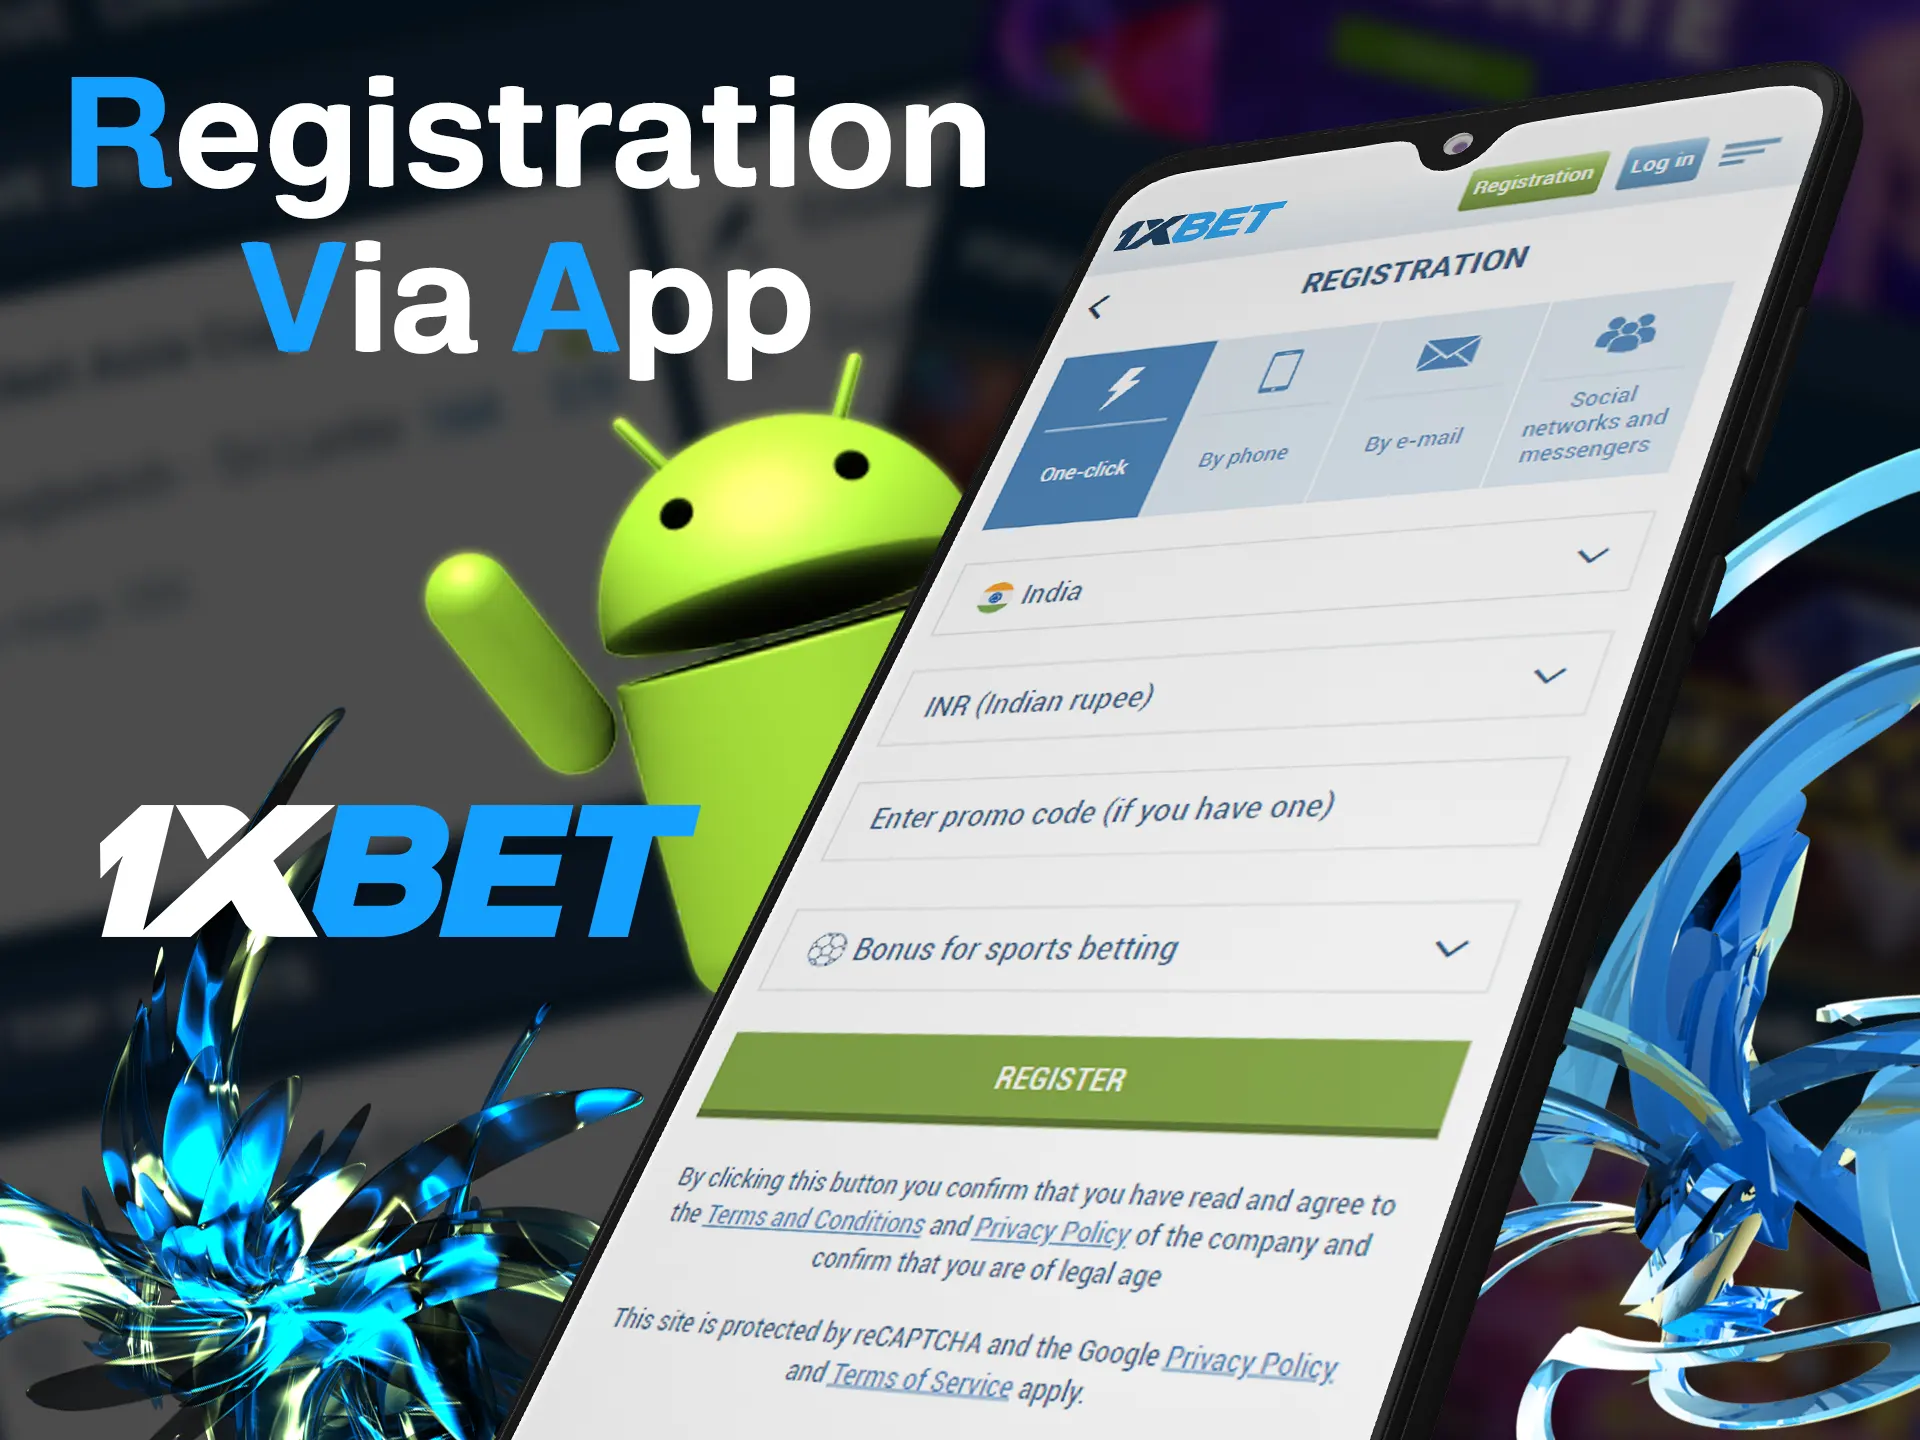 Use the 1xbet app to make a new account.